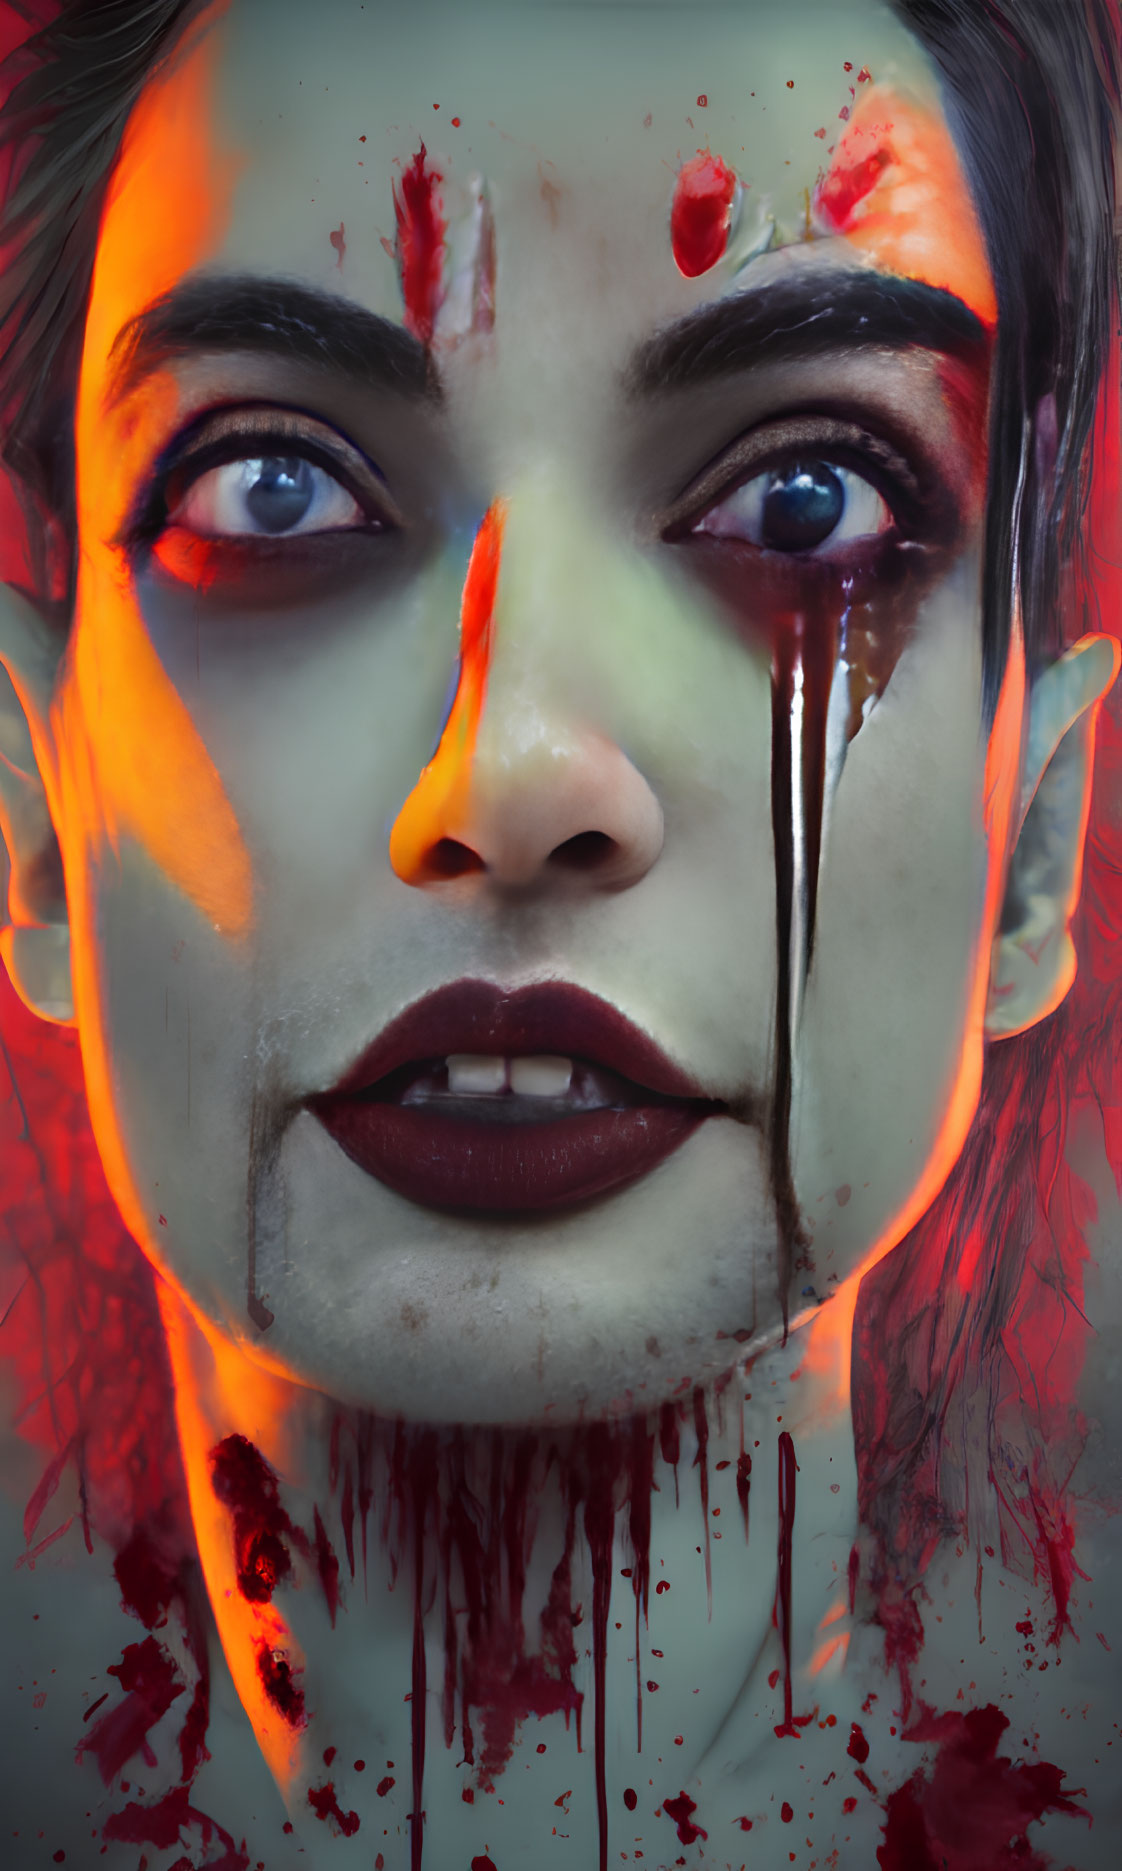 Intense portrait with blood-red embellishments on face